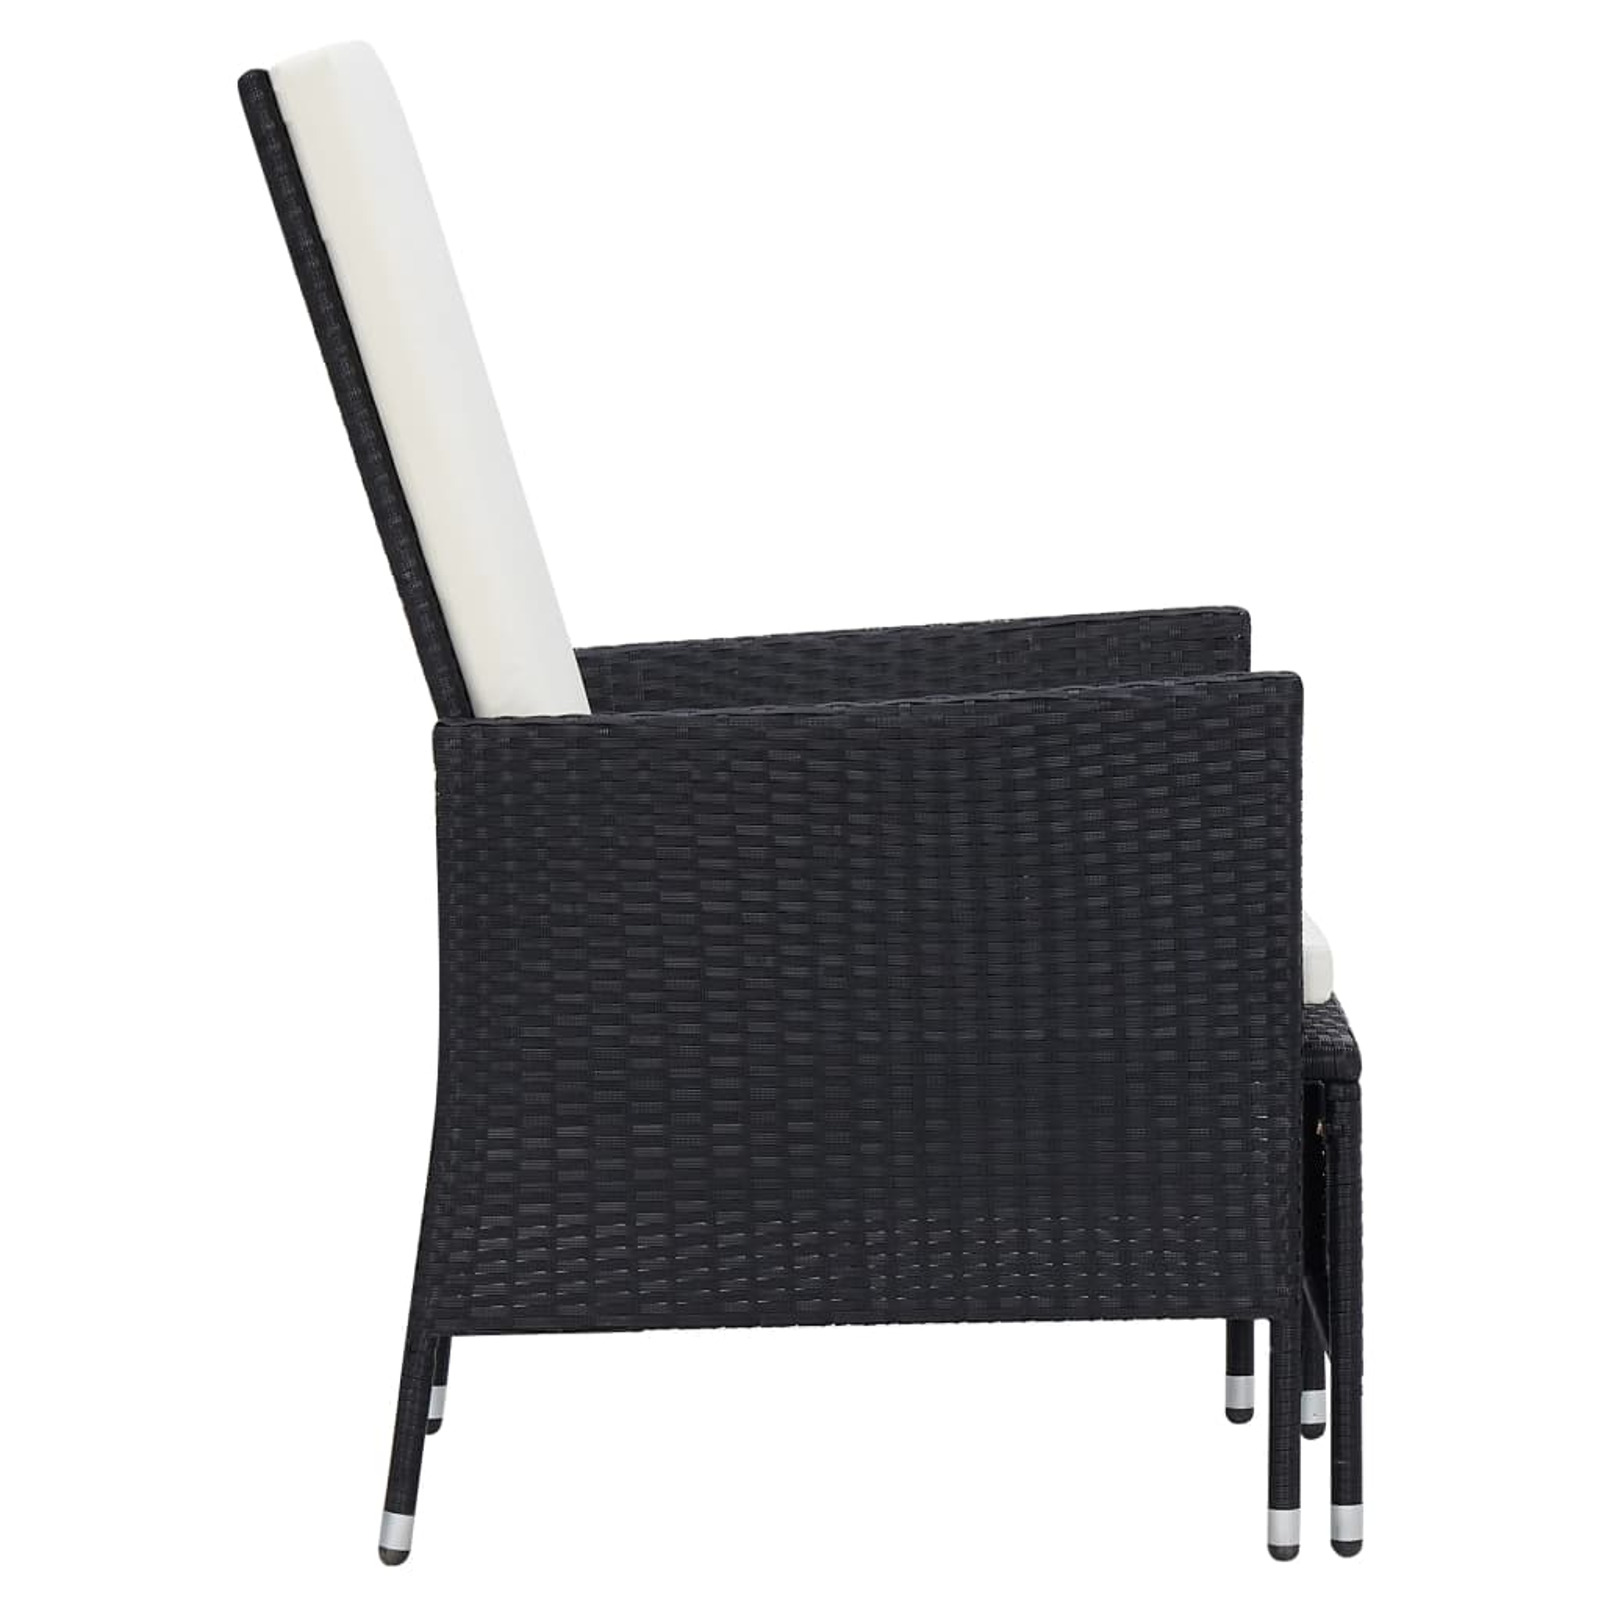 Reclining Patio Chair with Cushions Poly Rattan Black - image 4 of 7